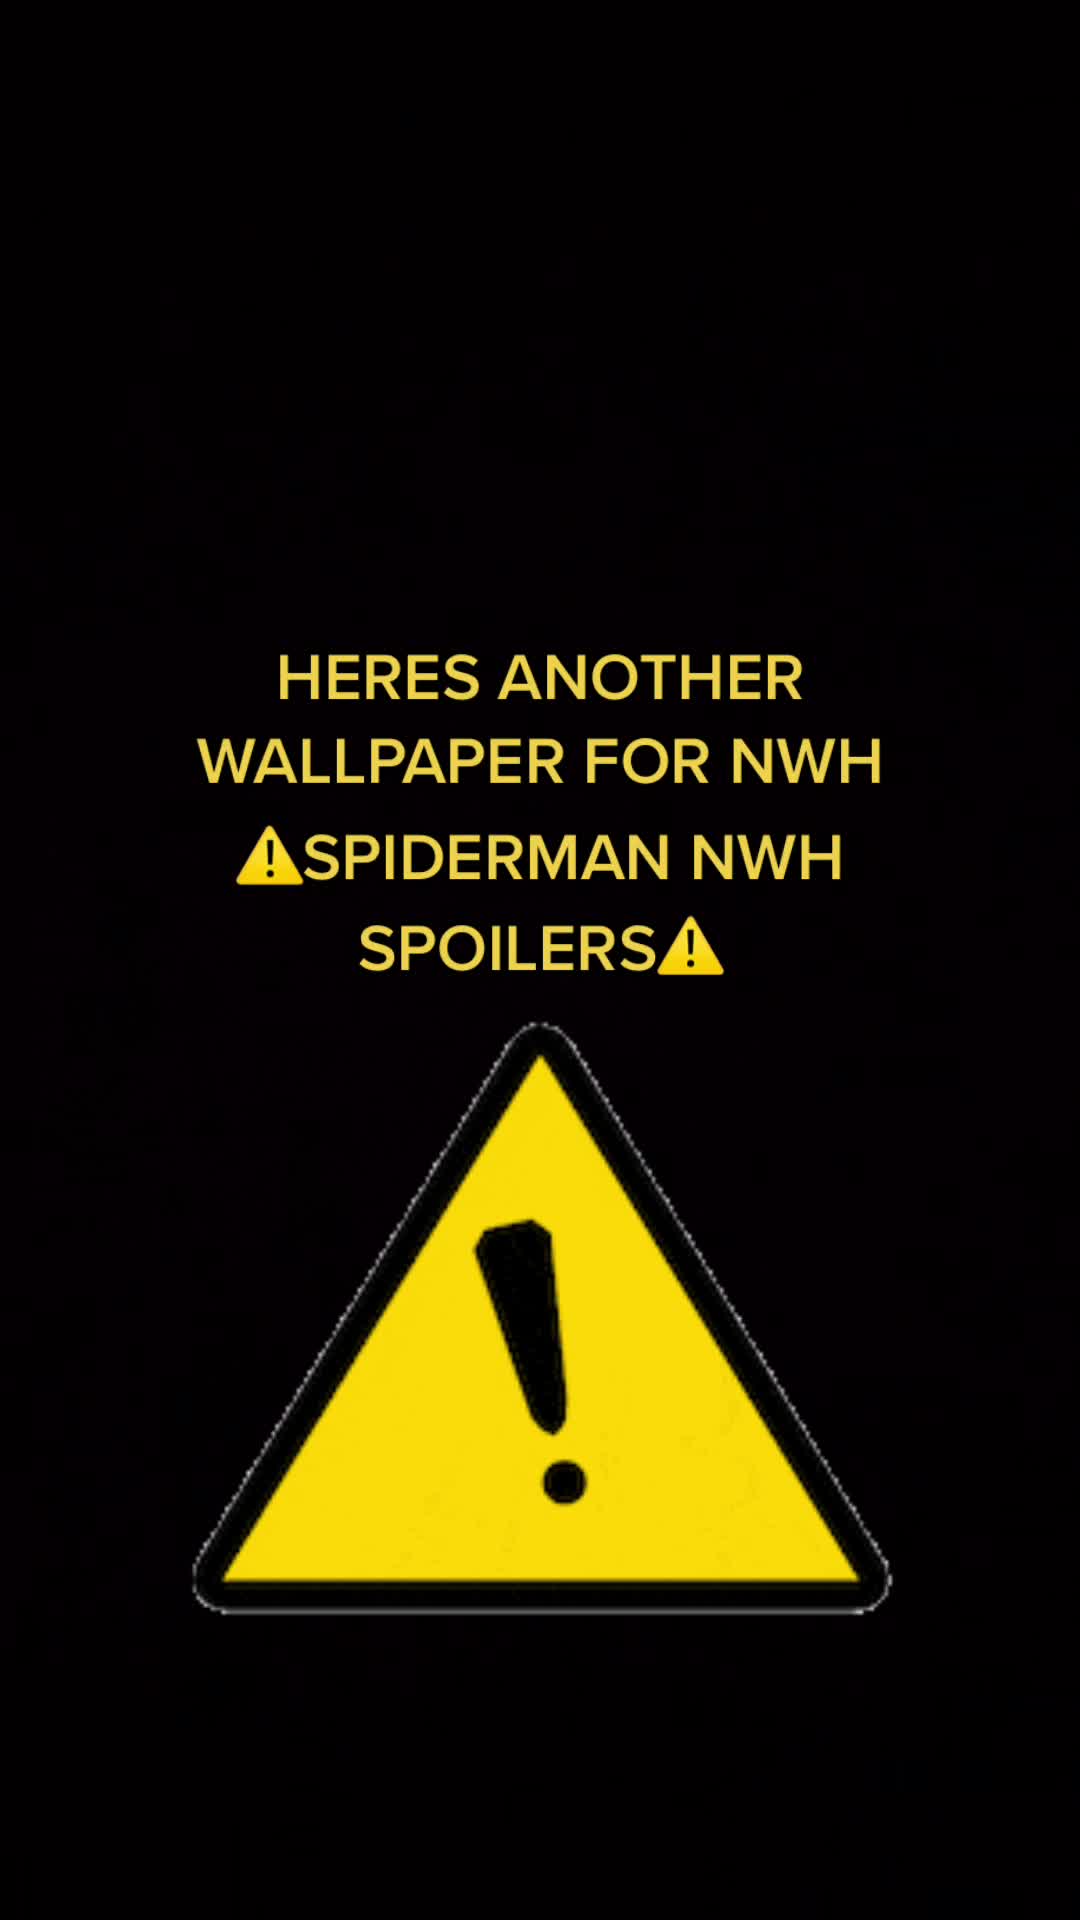 Discover nwh wallpaper with spoilers 's popular videos